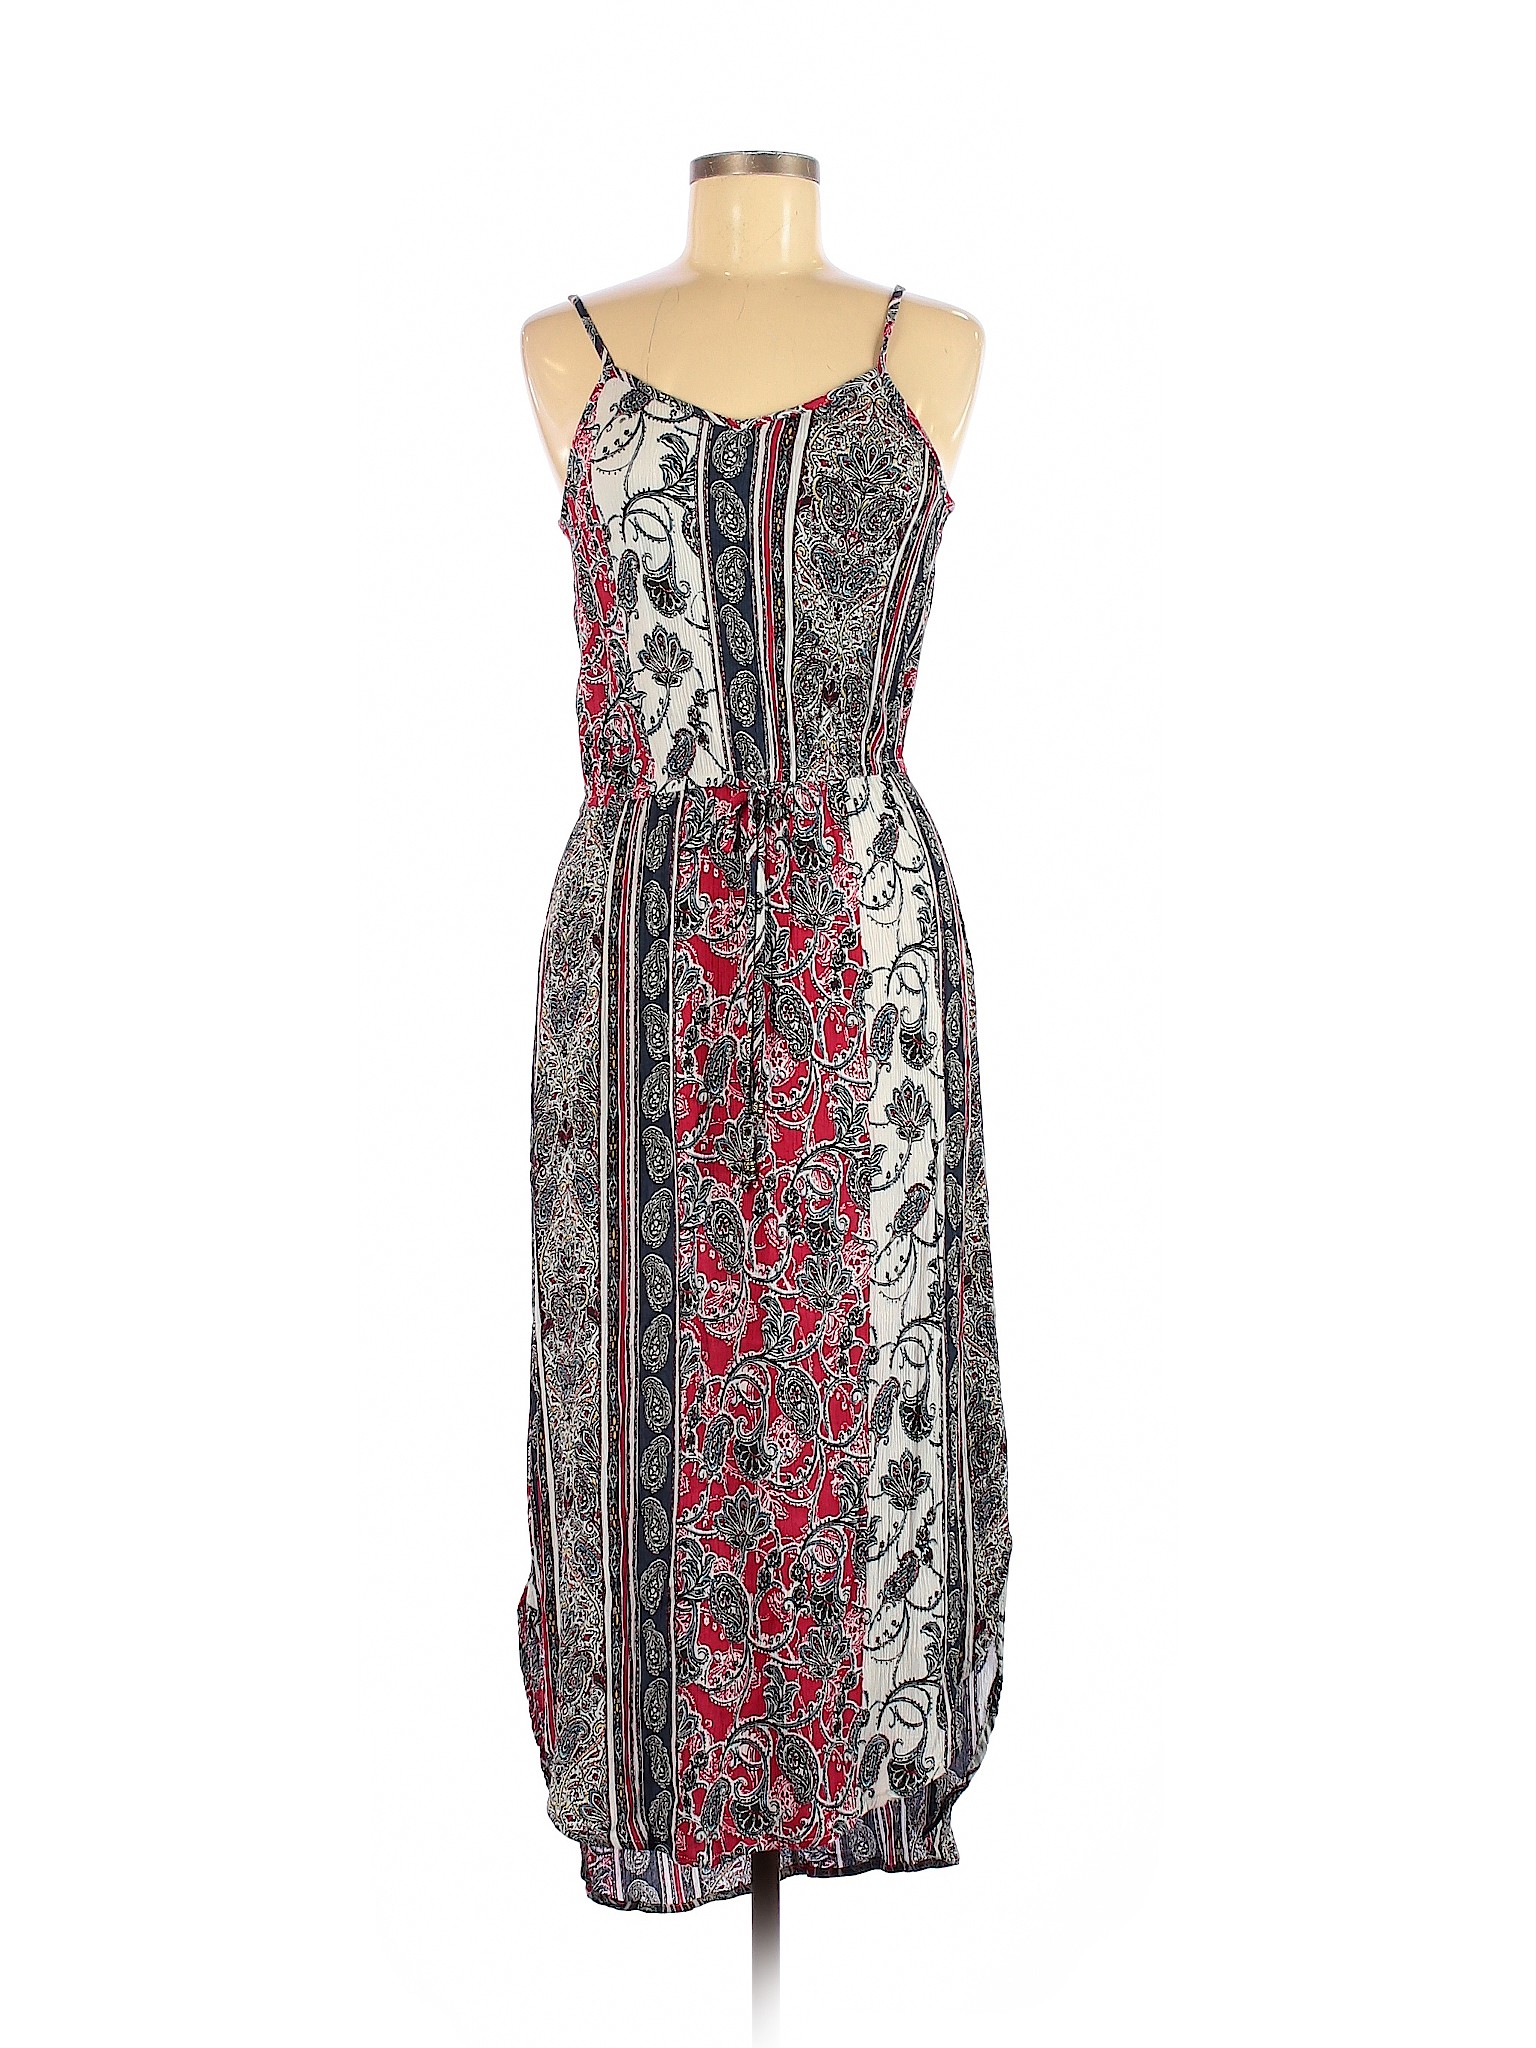 Knox Rose 100% Rayon Floral Paisley Red Casual Dress Size S - 62% off ...